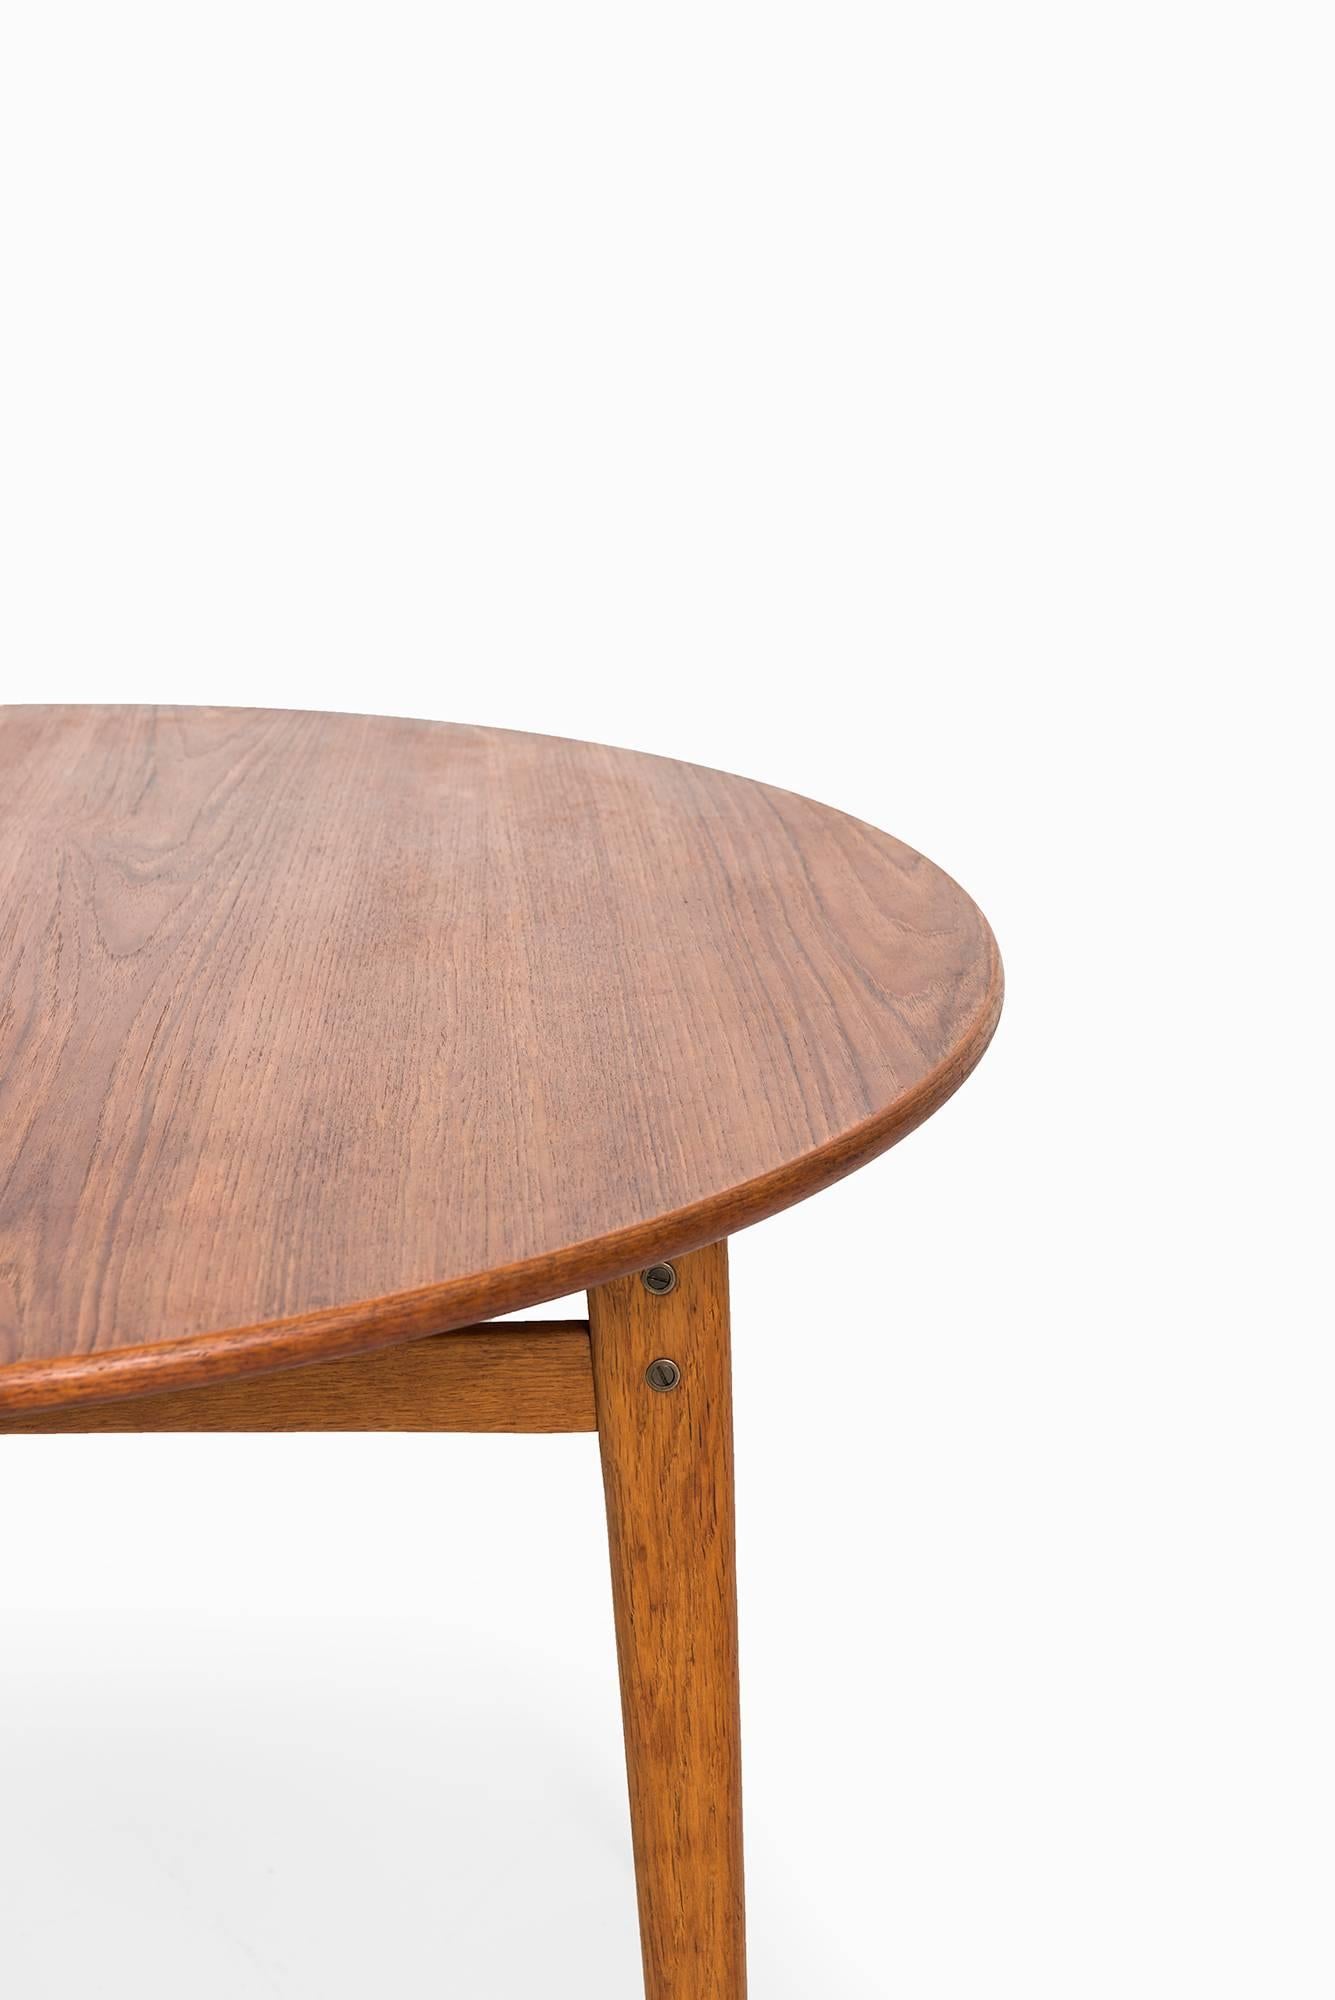 Swedish Midcentury Dining Table in Oak with Teak Top 